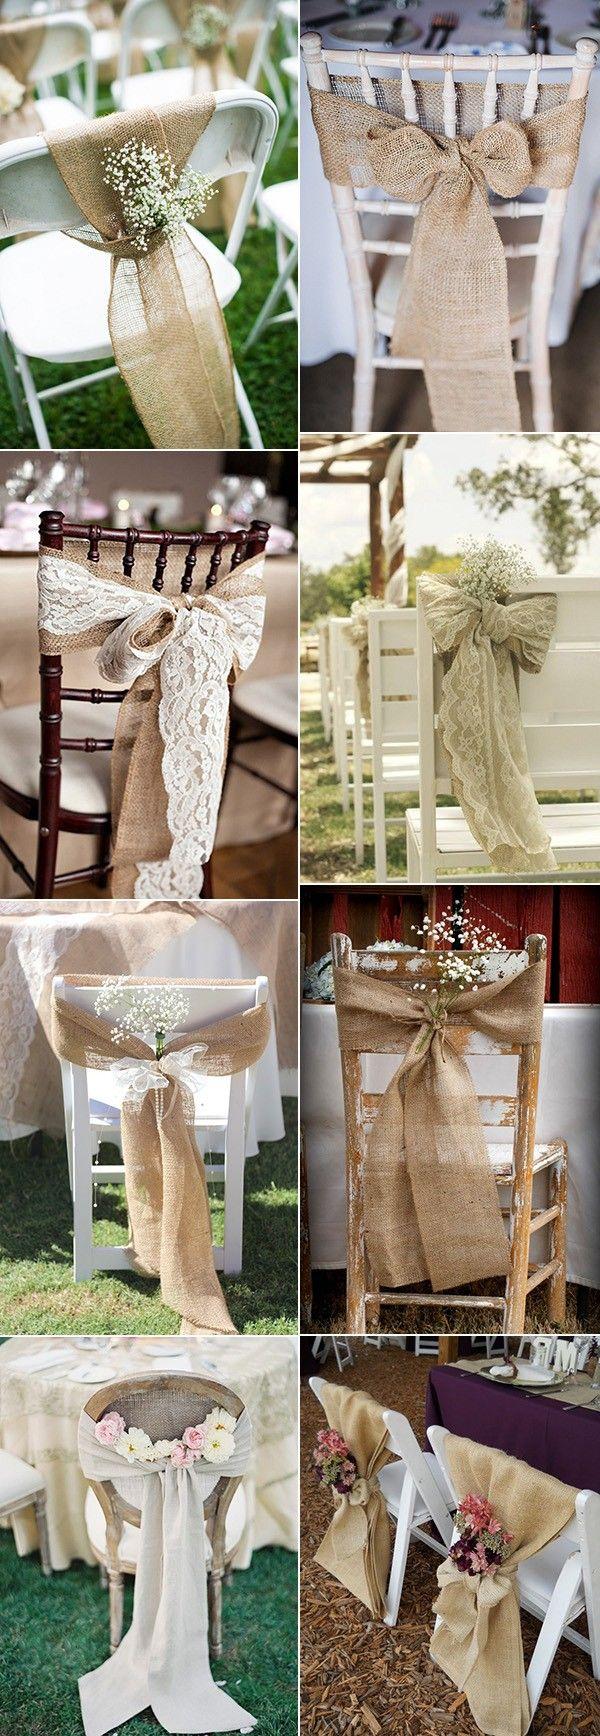 Wedding - 28 Awesome Wedding Chair Decoration Ideas For Ceremony And Reception